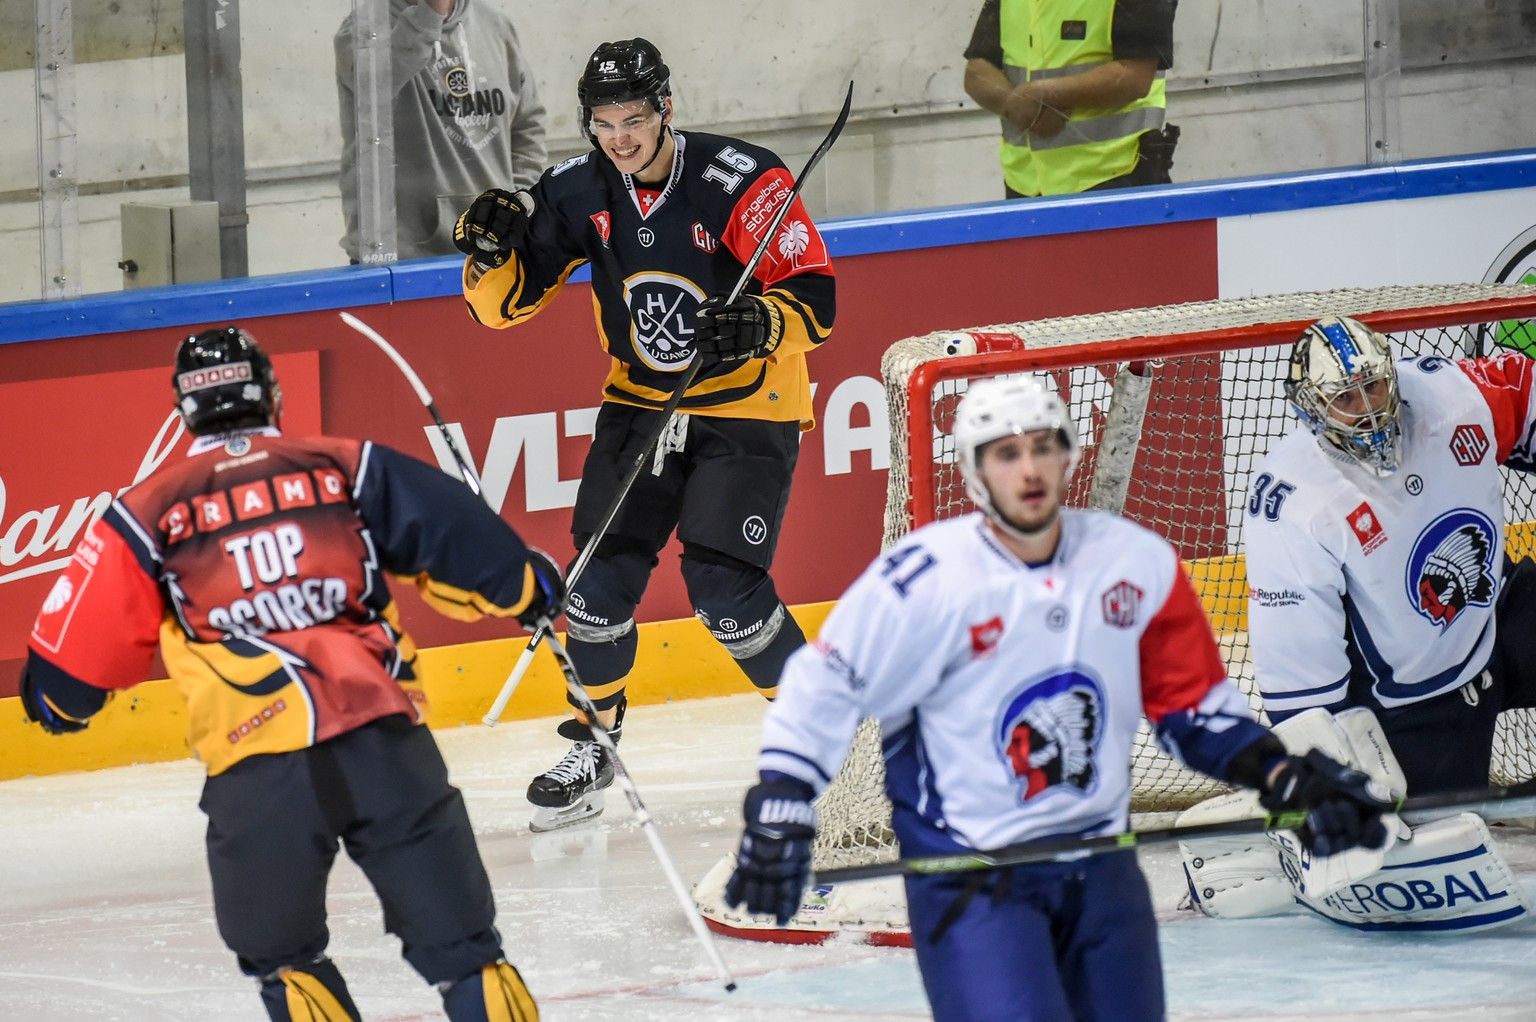 Lugano’s Gregory Hofmann, left, scores 1:0 against Pilsen&#039;s Matej Machovsky, right, during the Champions League round of 32 ice hockey match between HC Lugano and HC Plzen, at the ice stadium Res ...